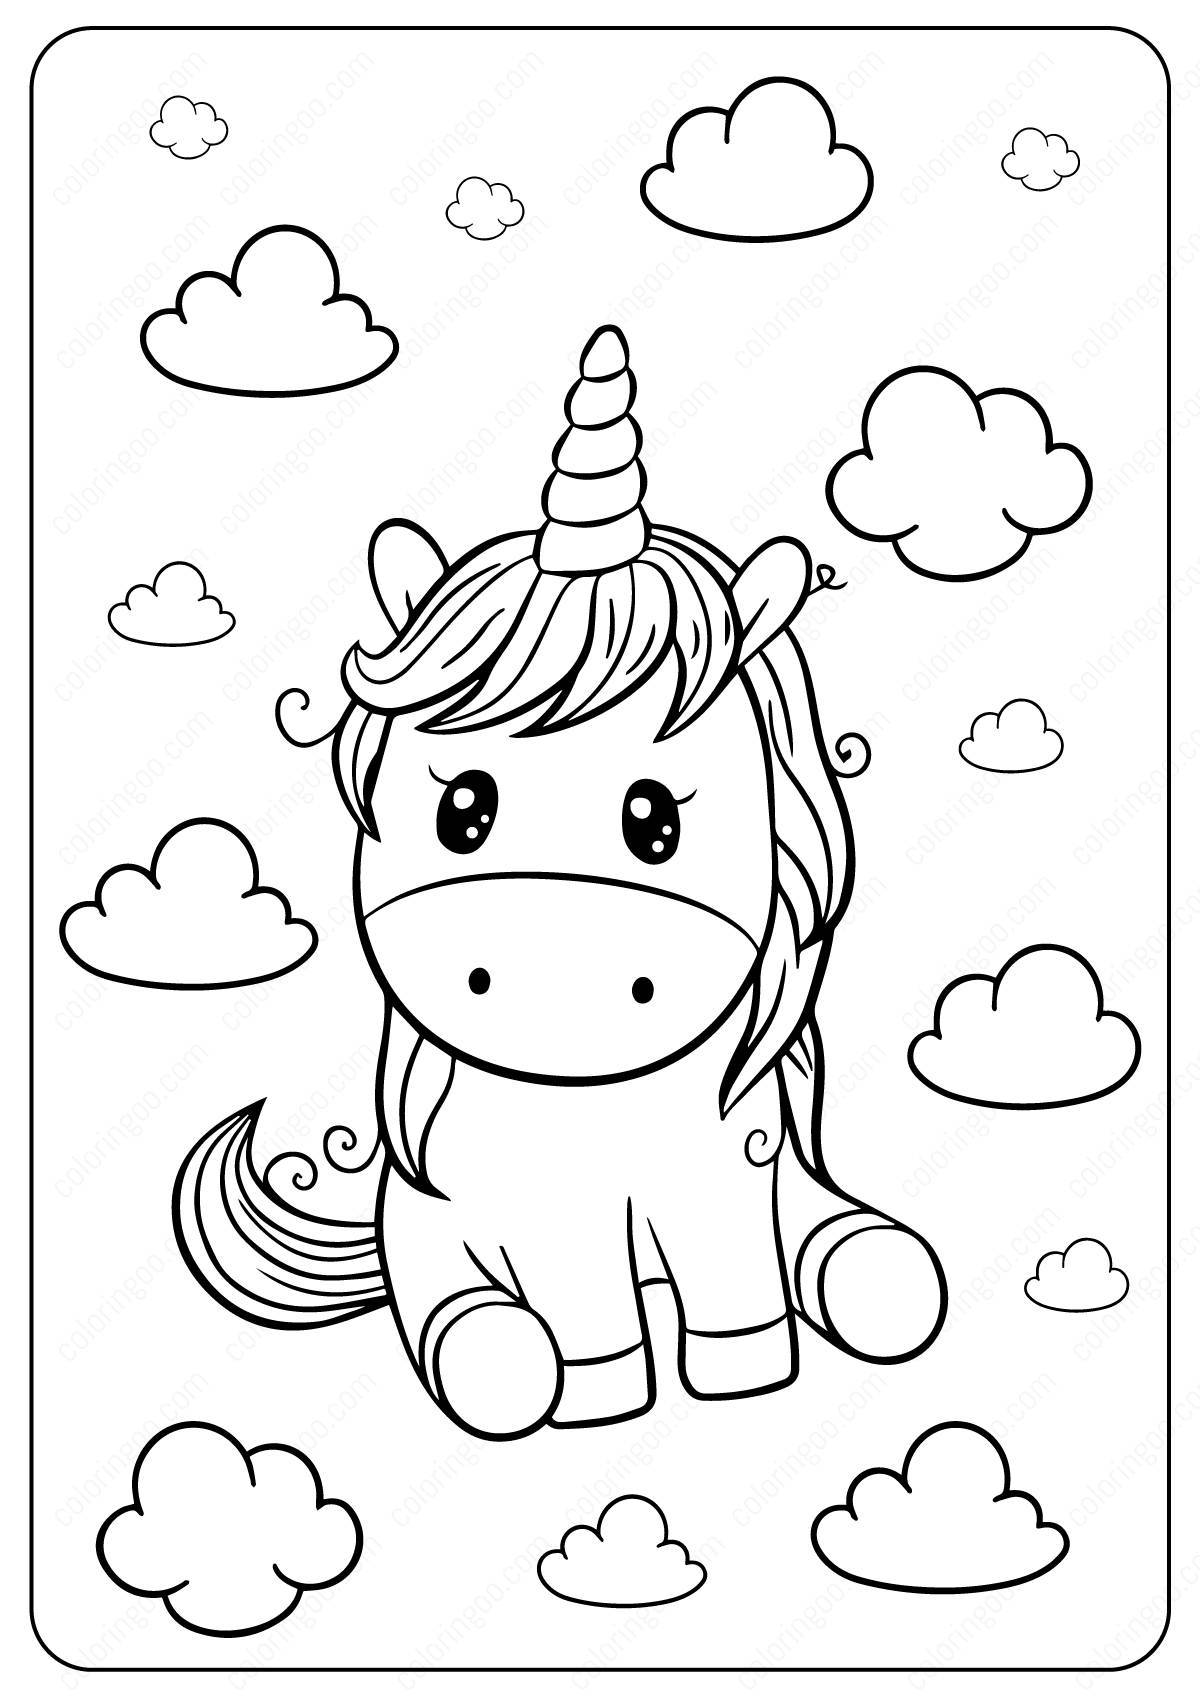 Incredible unicorn coloring book for kids 3-4 years old